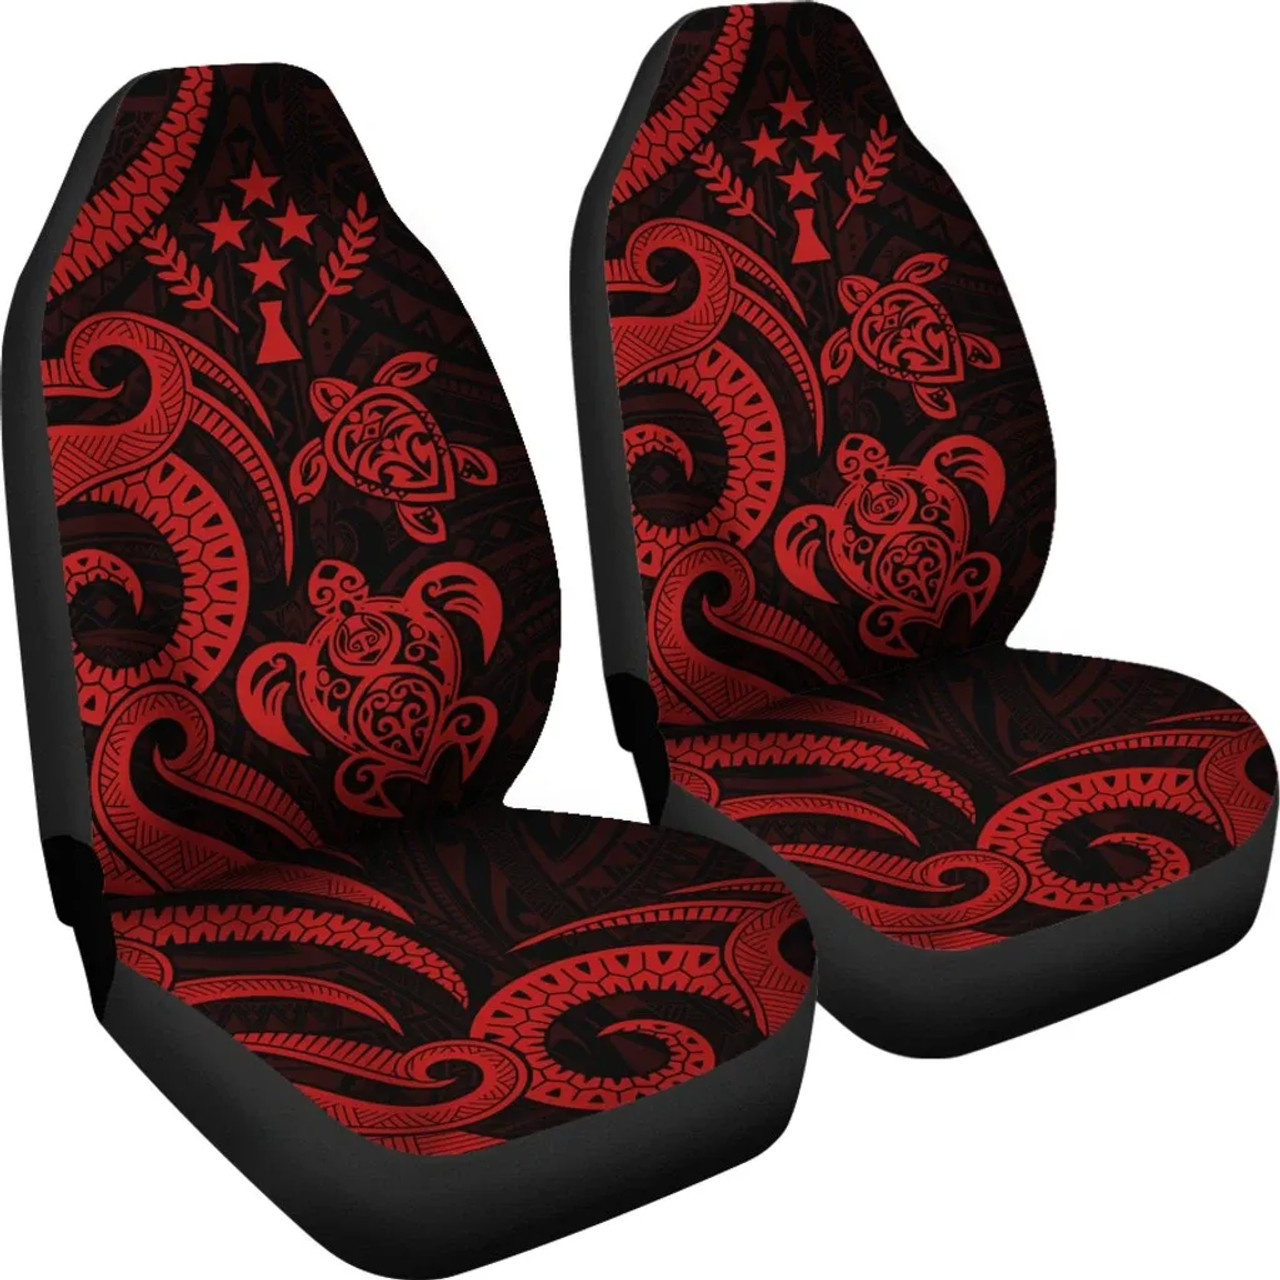 Kosrae Micronesian Car Seat Covers - Red Tentacle Turtle